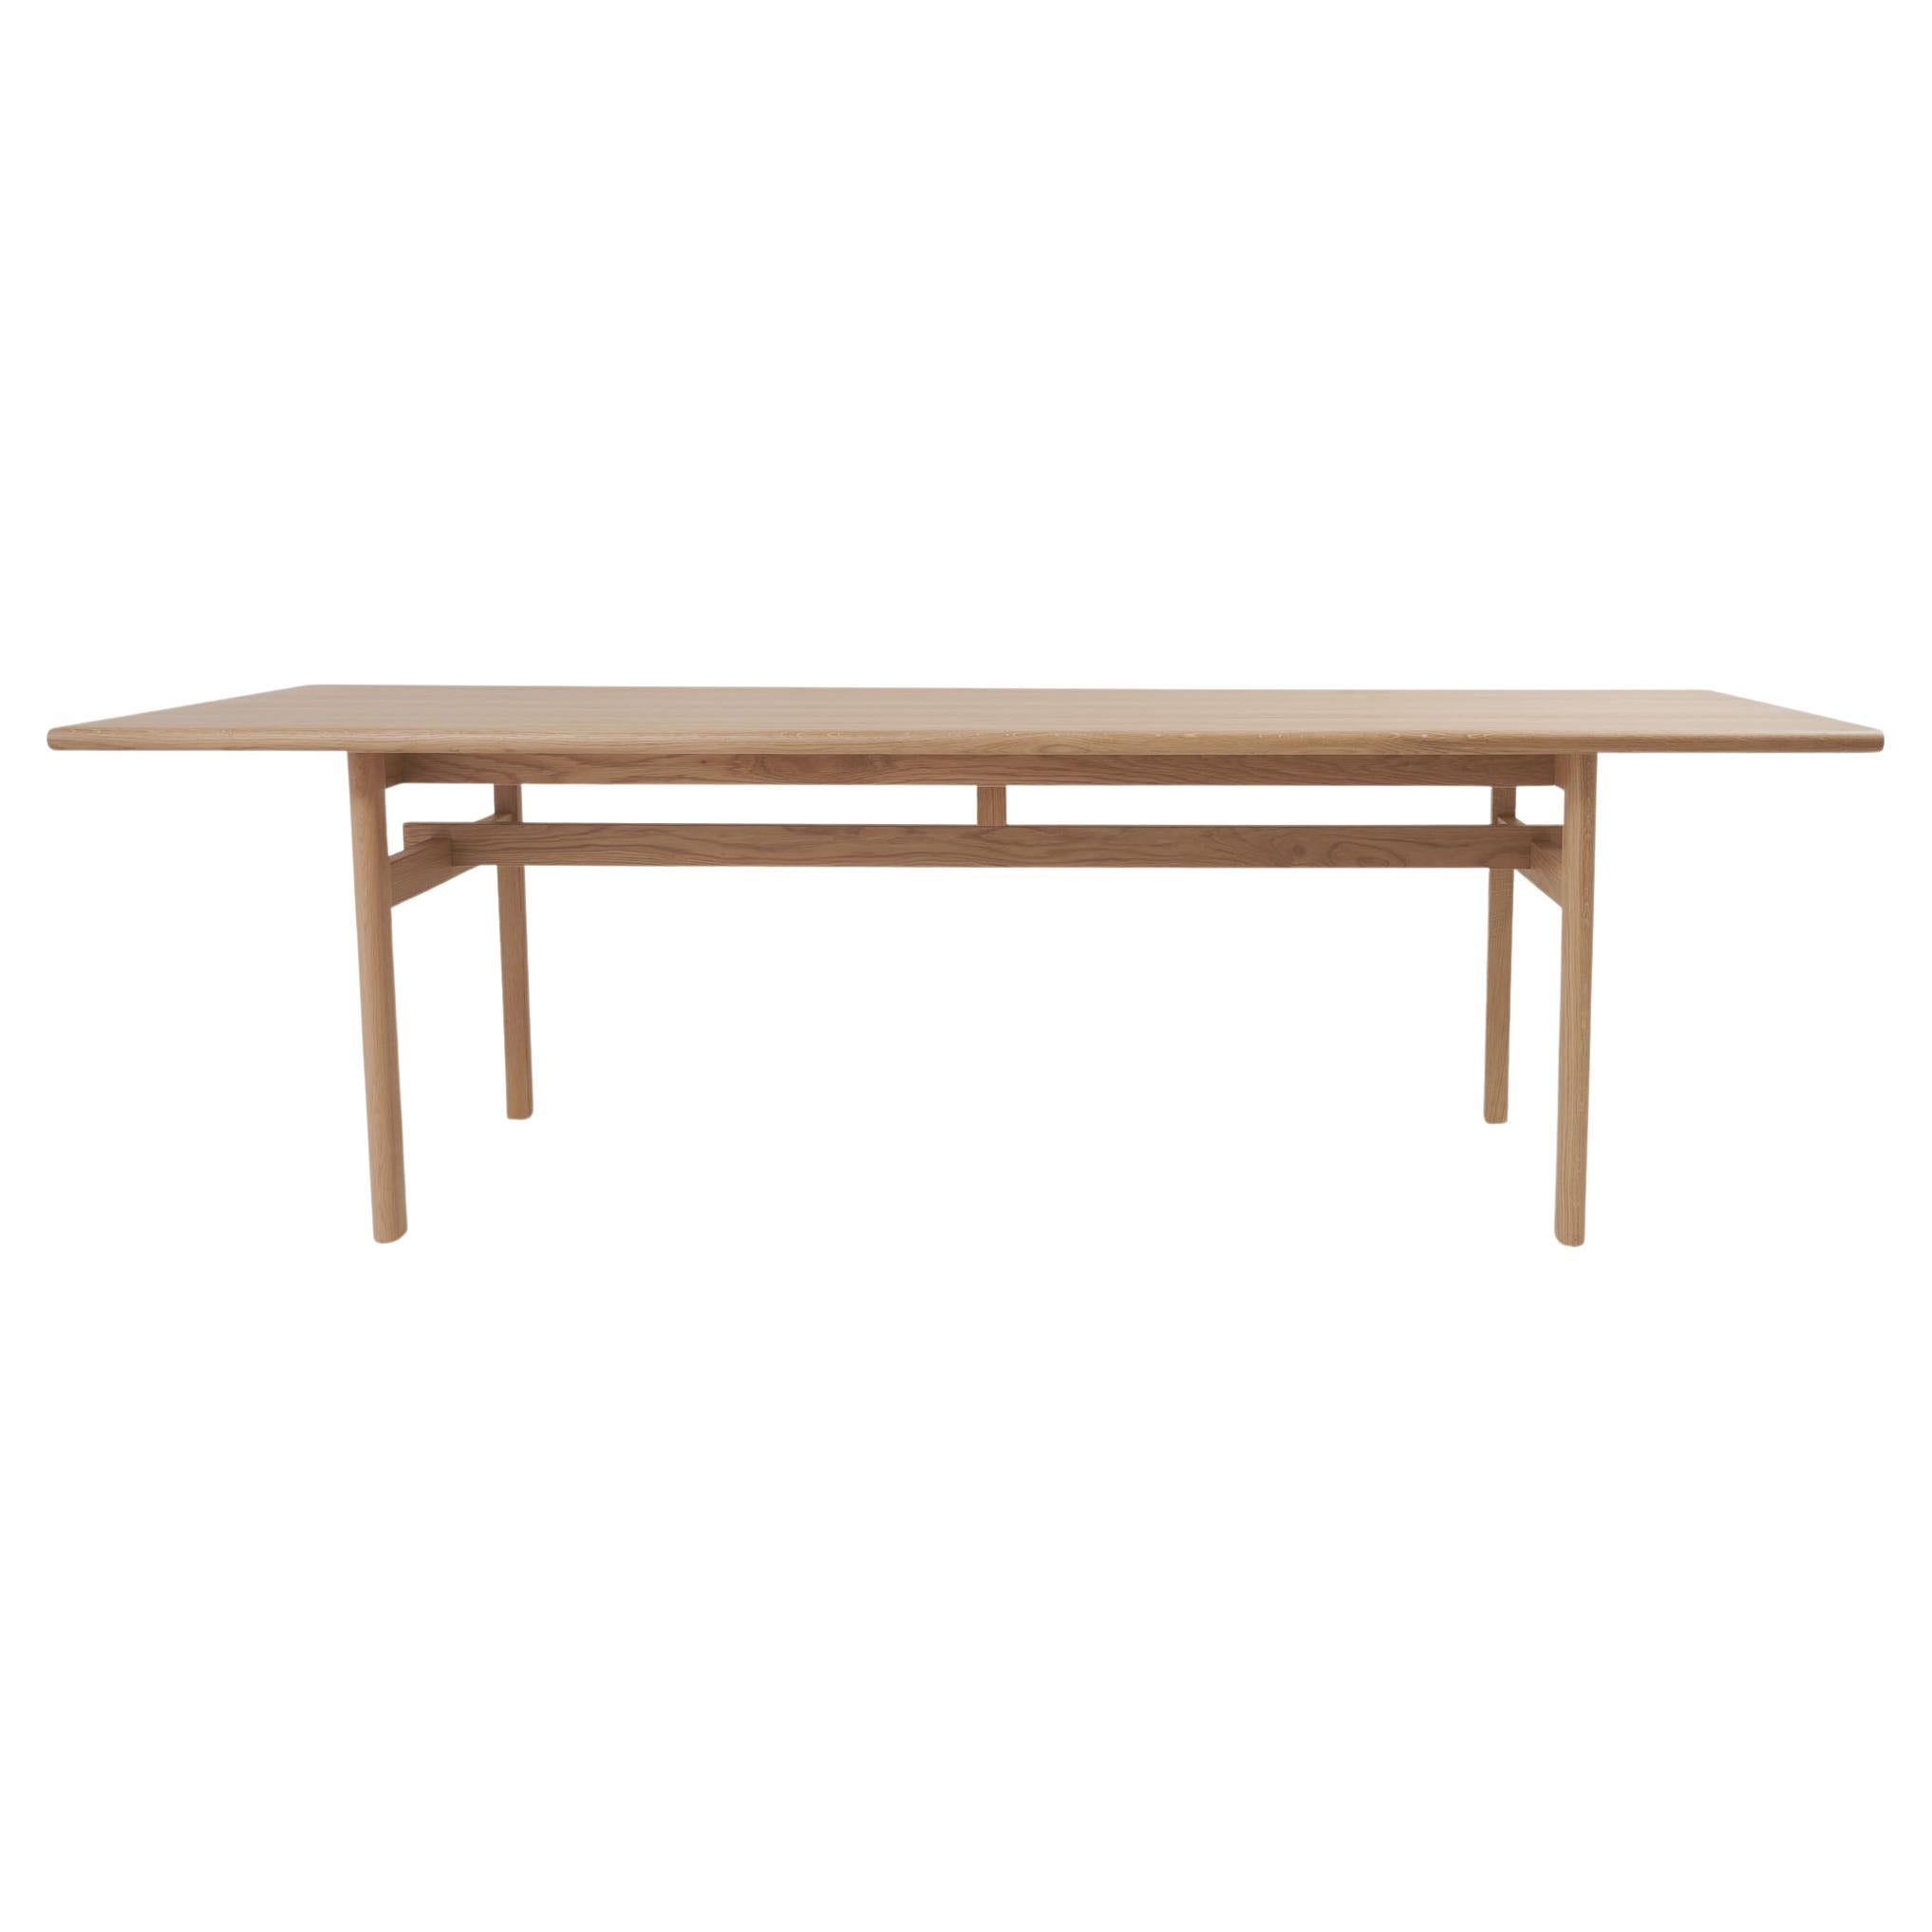 Schumacher Editions Mokki 75" Dining Table in White Oak For Sale